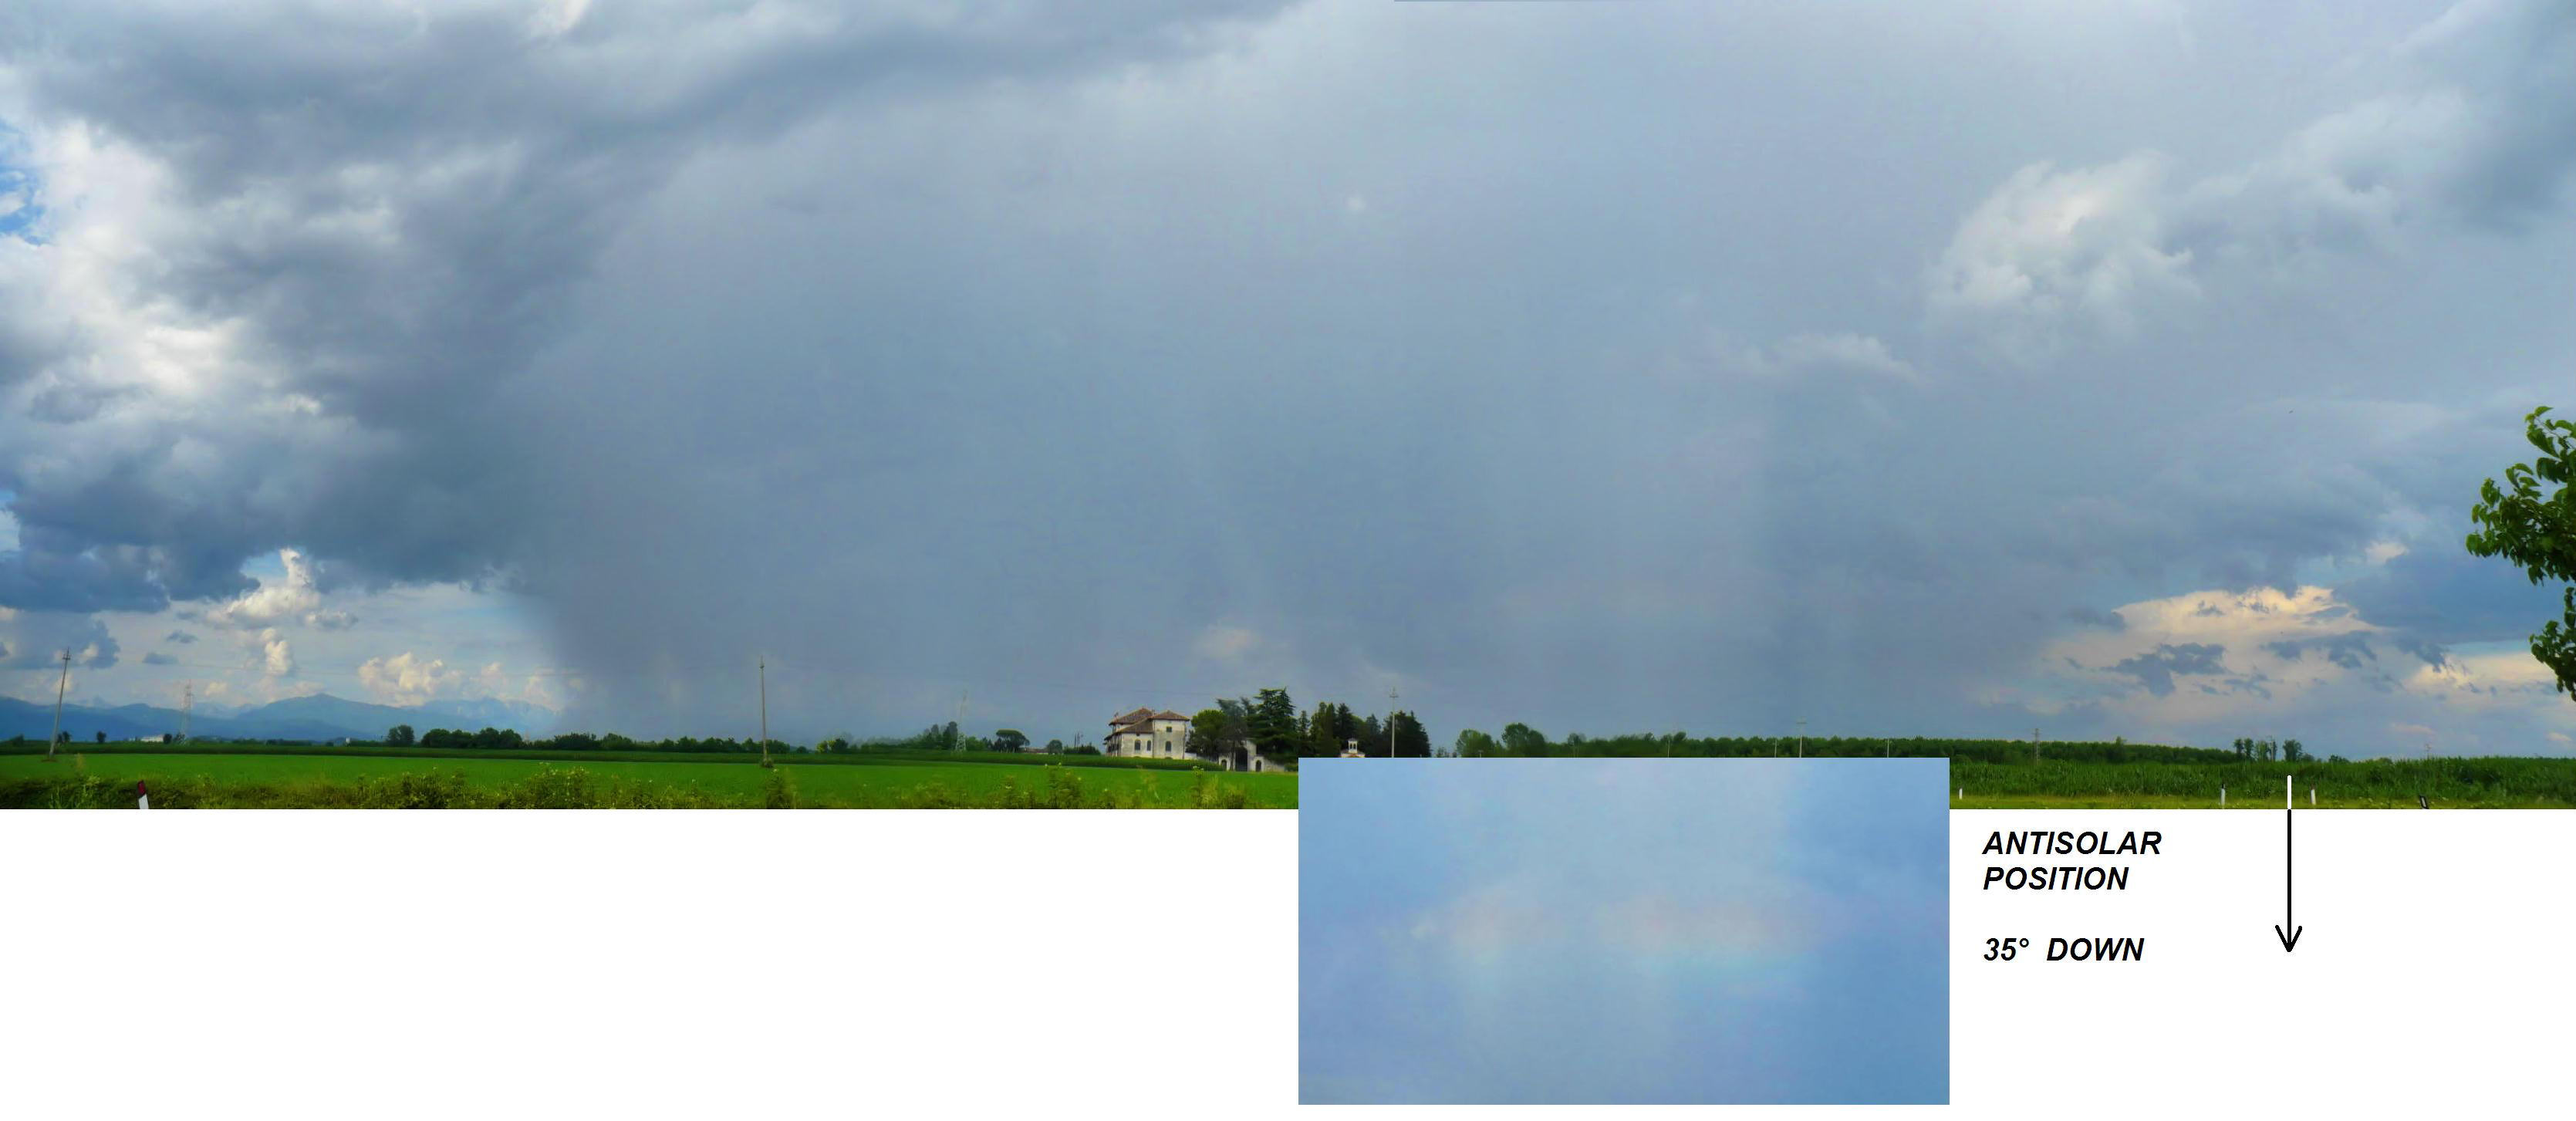 Rainbow over horizon?: 262 KB; click on the image to enlarge